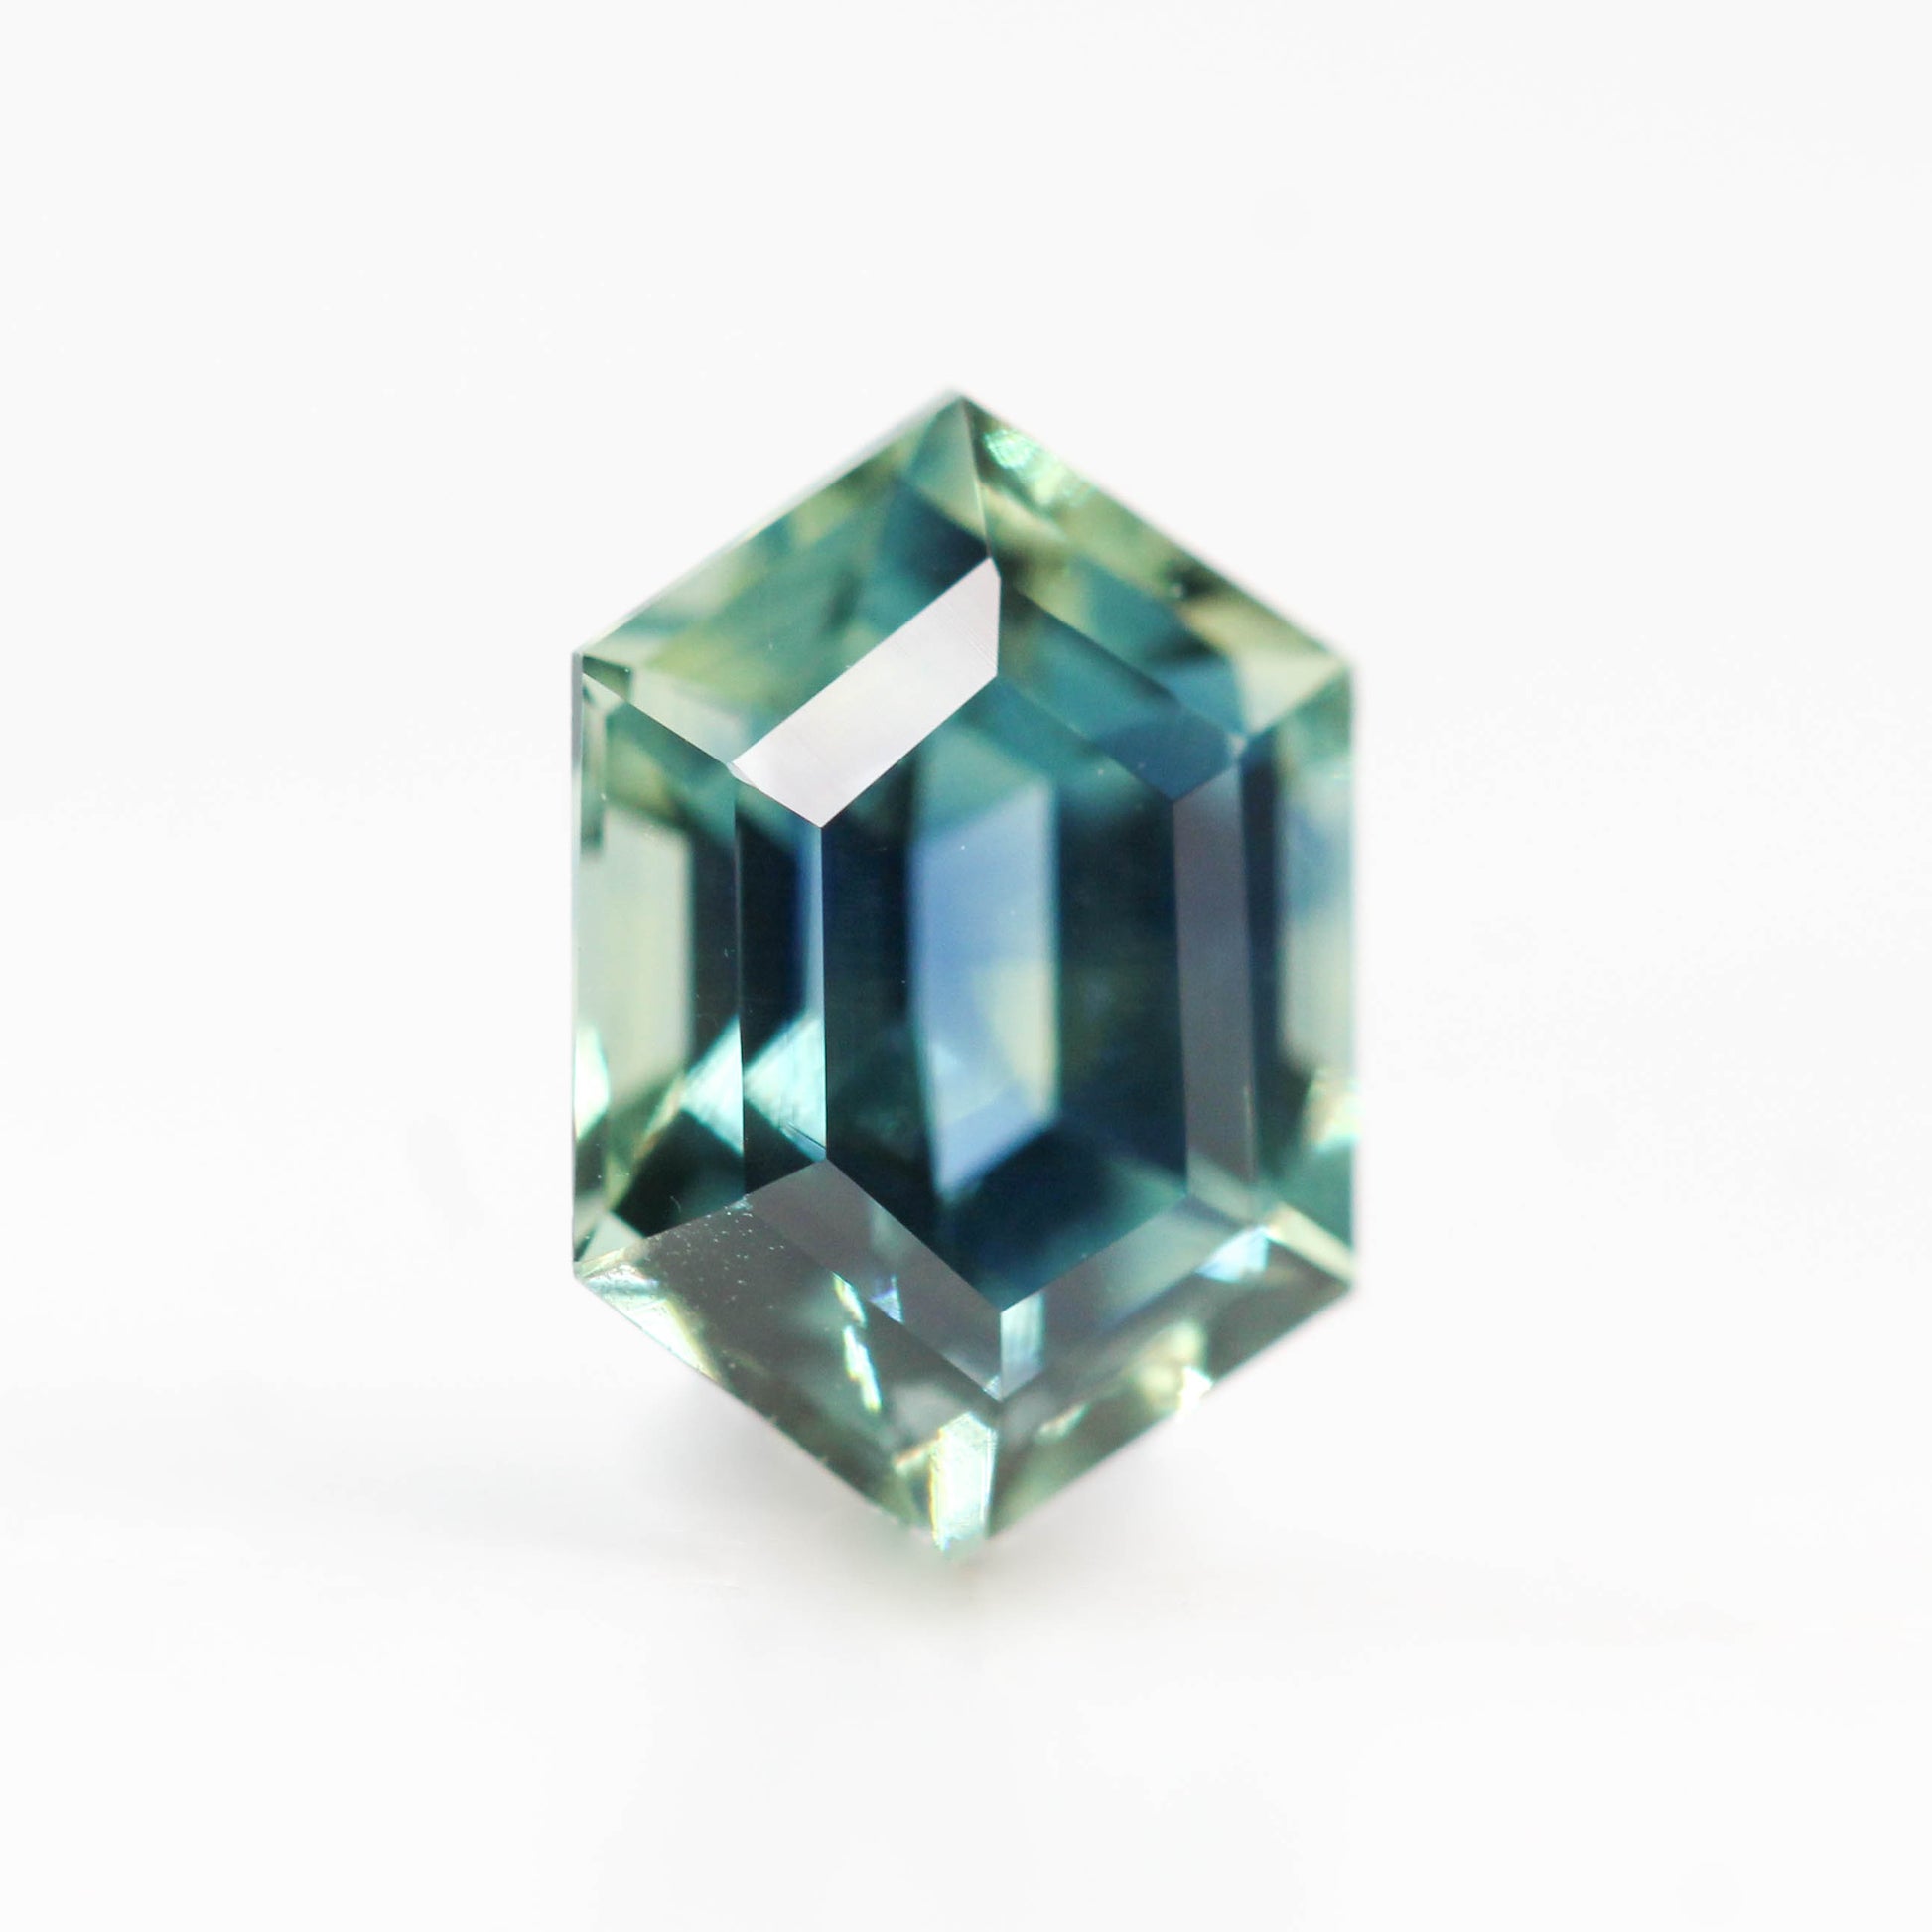 1.55 Carat Teal Hexagon Sapphire for Custom Work - Inventory Code THS155 - Midwinter Co. Alternative Bridal Rings and Modern Fine Jewelry